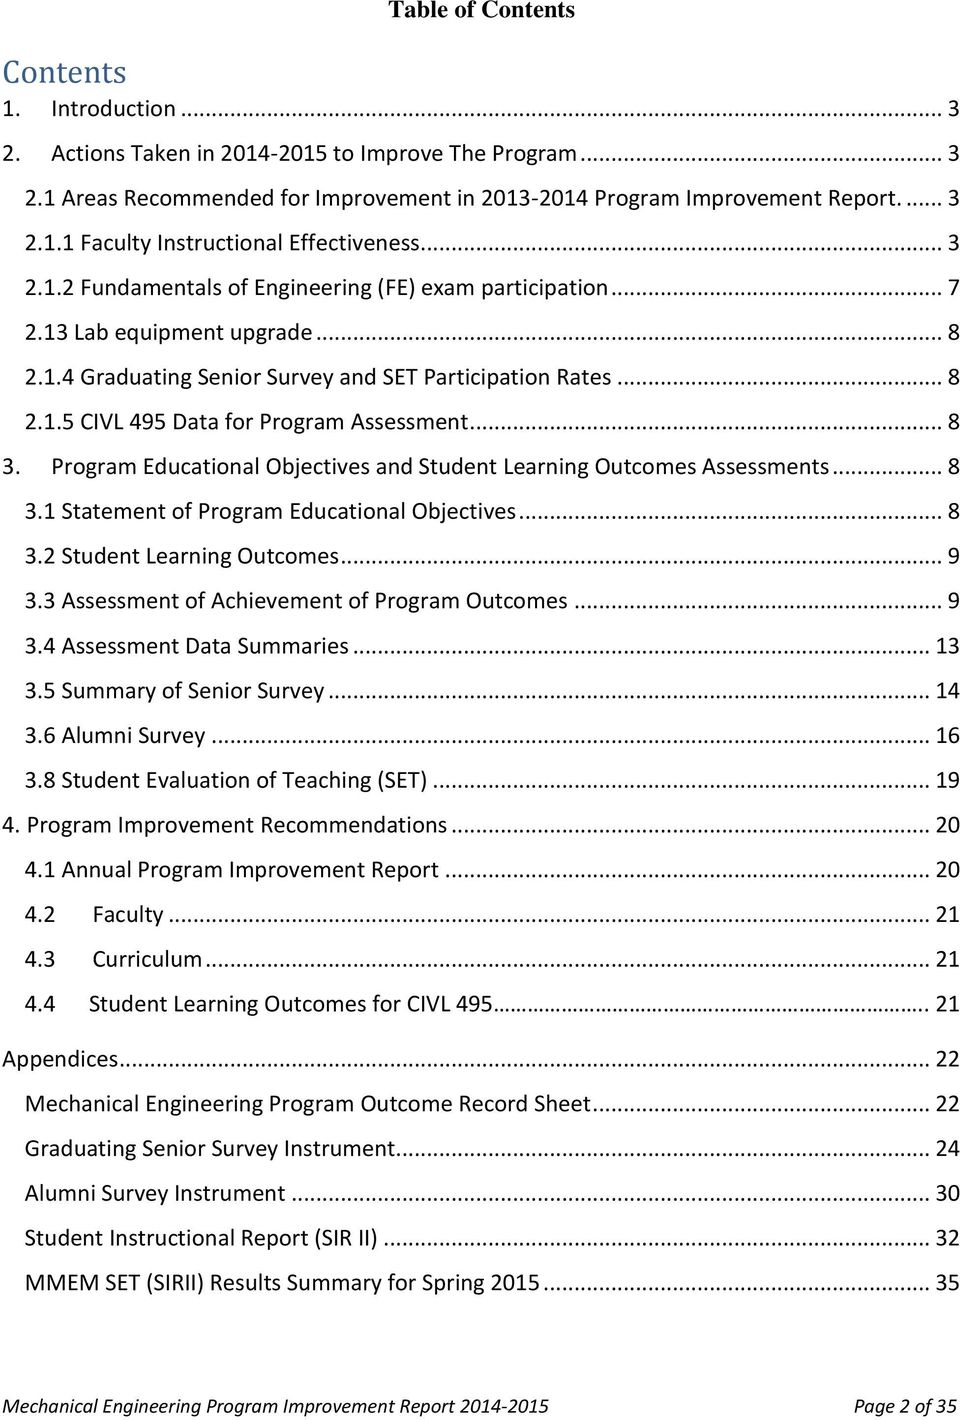 .. 8 3. Program Educational Objectives and Student Learning Outcomes Assessments... 8 3.1 Statement of Program Educational Objectives... 8 3.2 Student Learning Outcomes... 9 3.